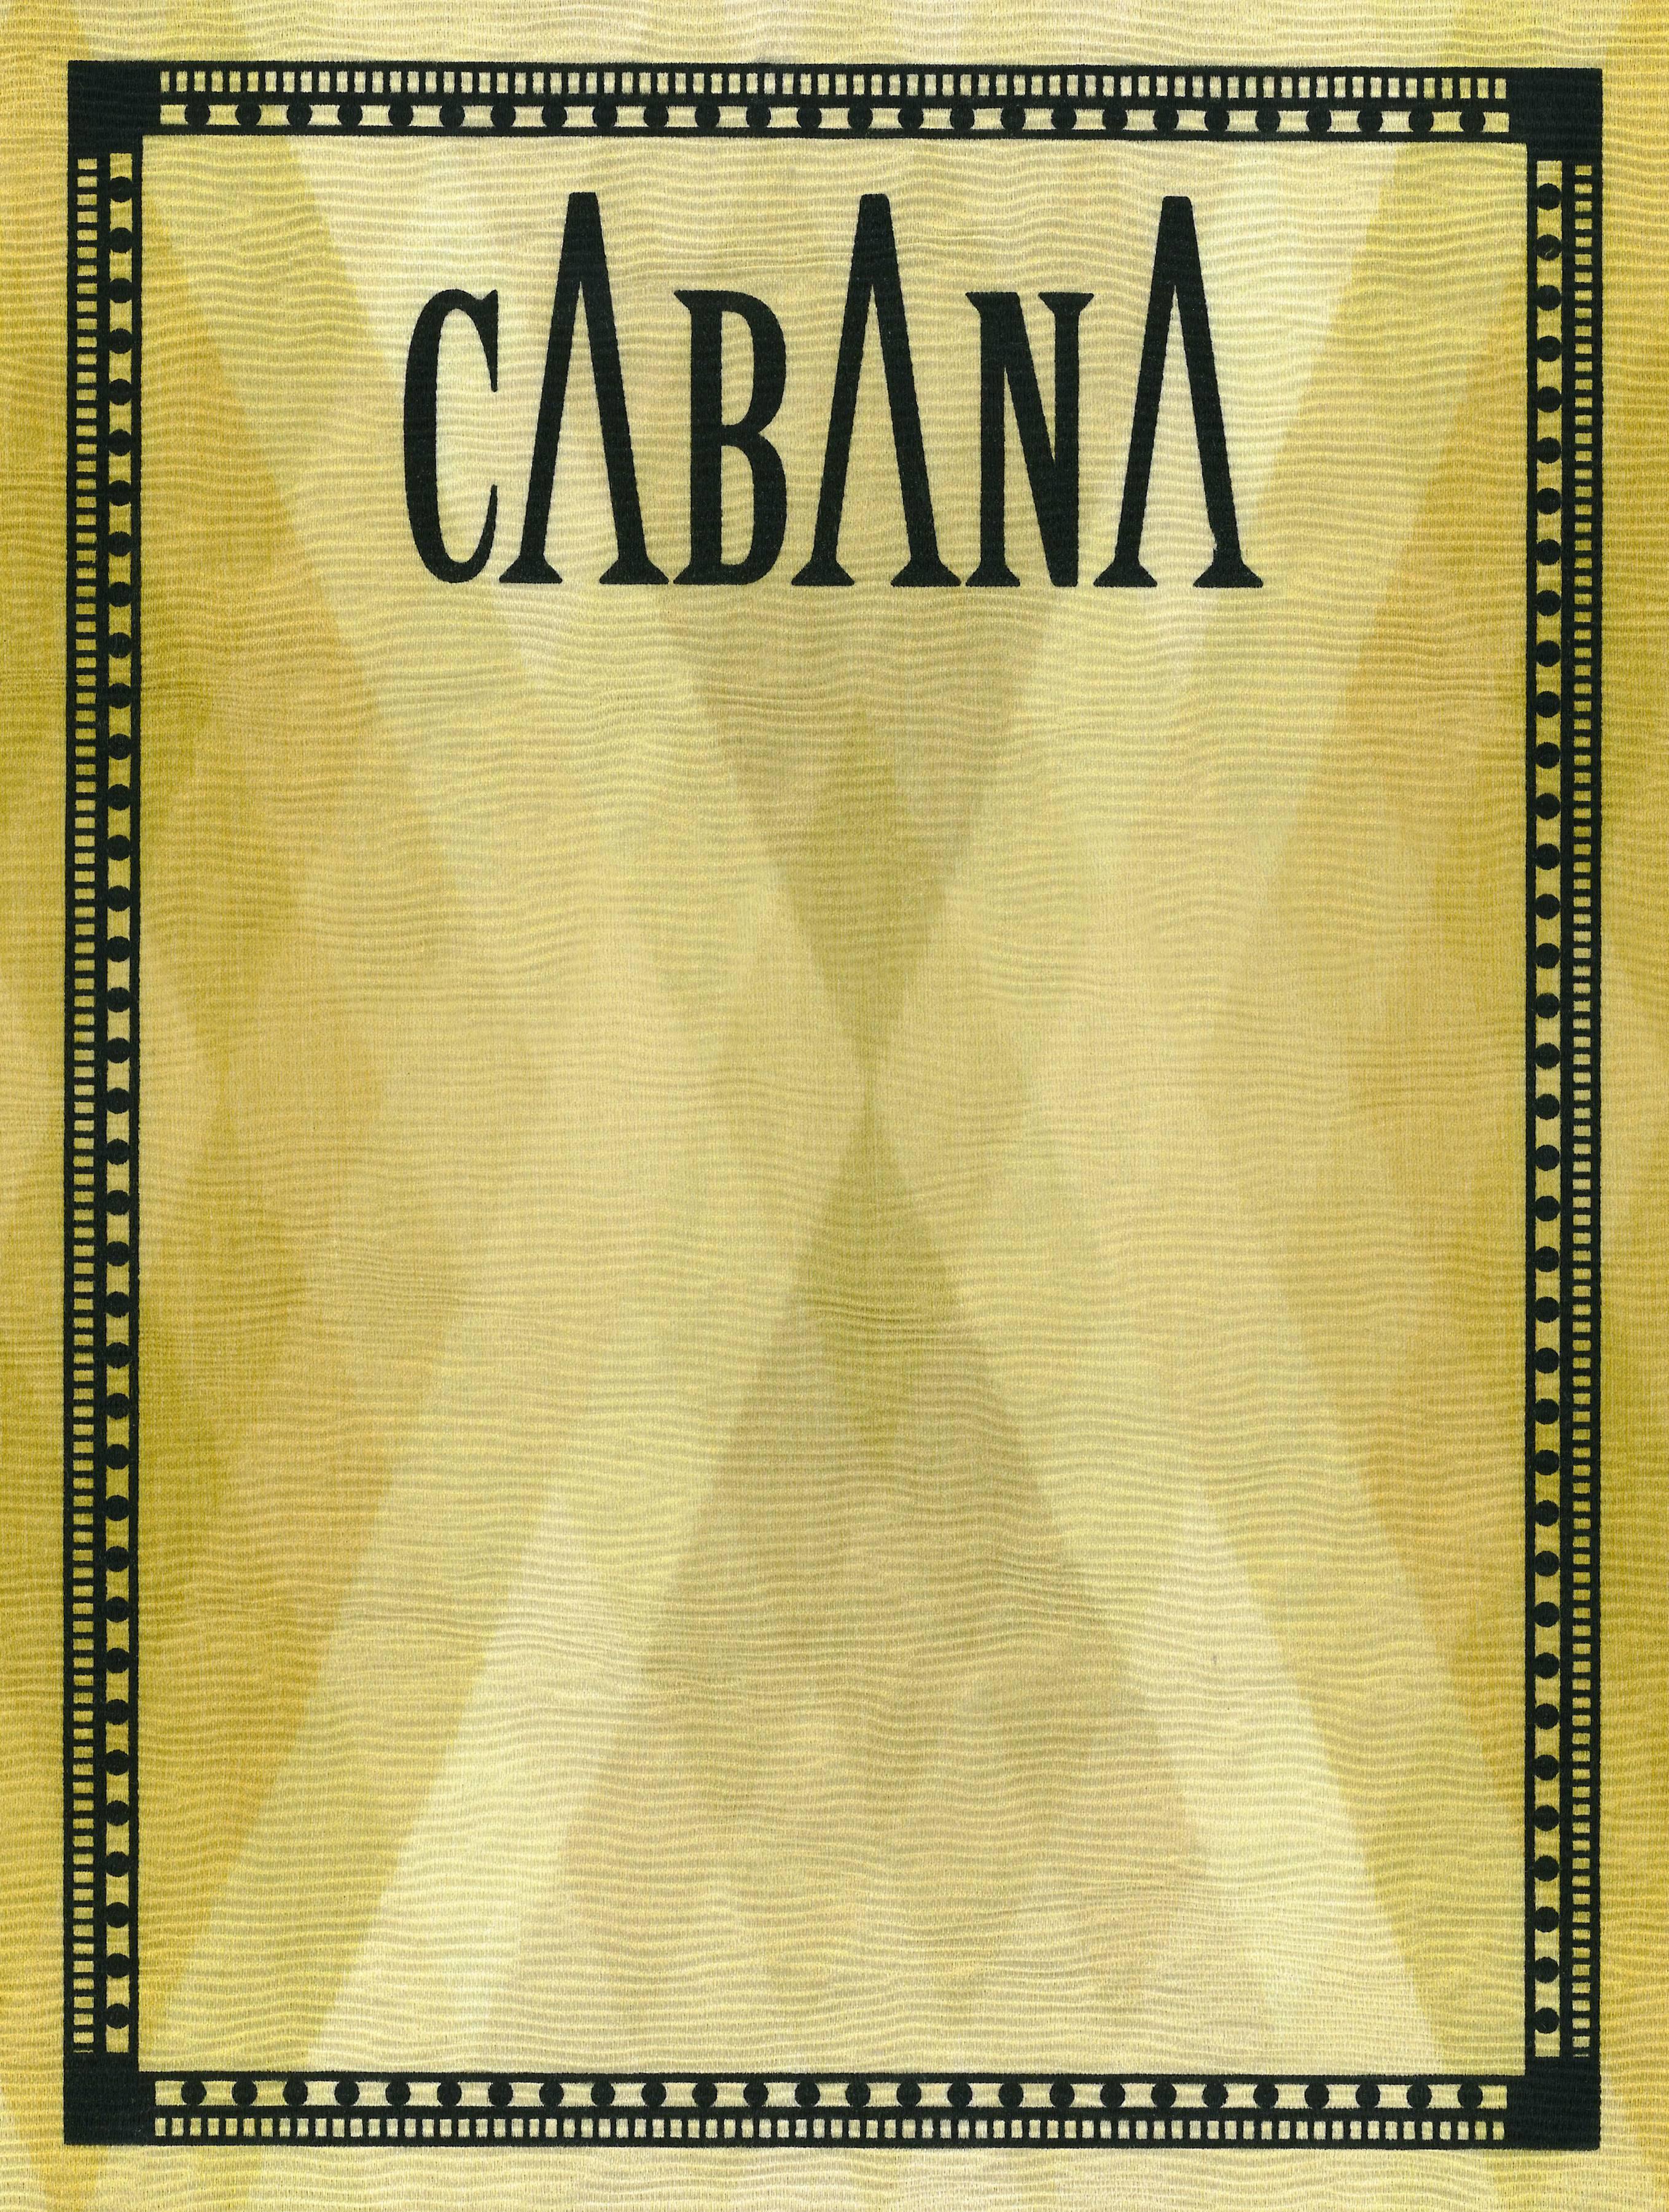 Cabana magazine issue 4 with covers by Dedar Milano. This is the fourth issue of the international biannual interiors magazine. The issue comes with four different covers that are made with fabrics by Dedar. Features inside include a portfolio on